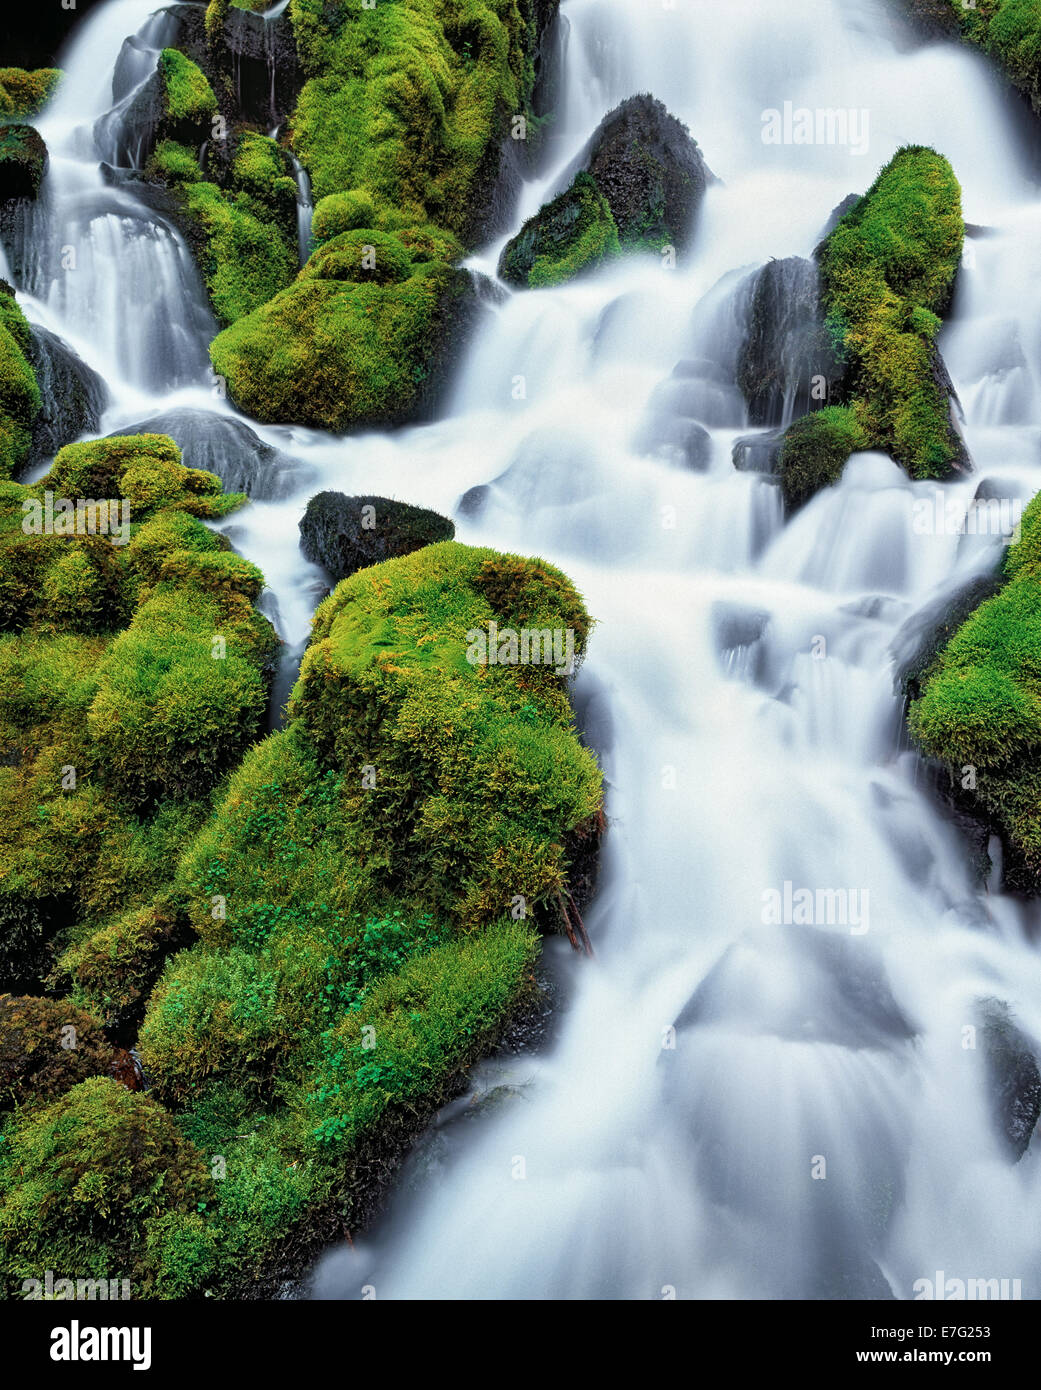 Clearwater Falls rushes over the moss covered rocks in Oregon's Umpqua National Forest and Douglas County. Stock Photo